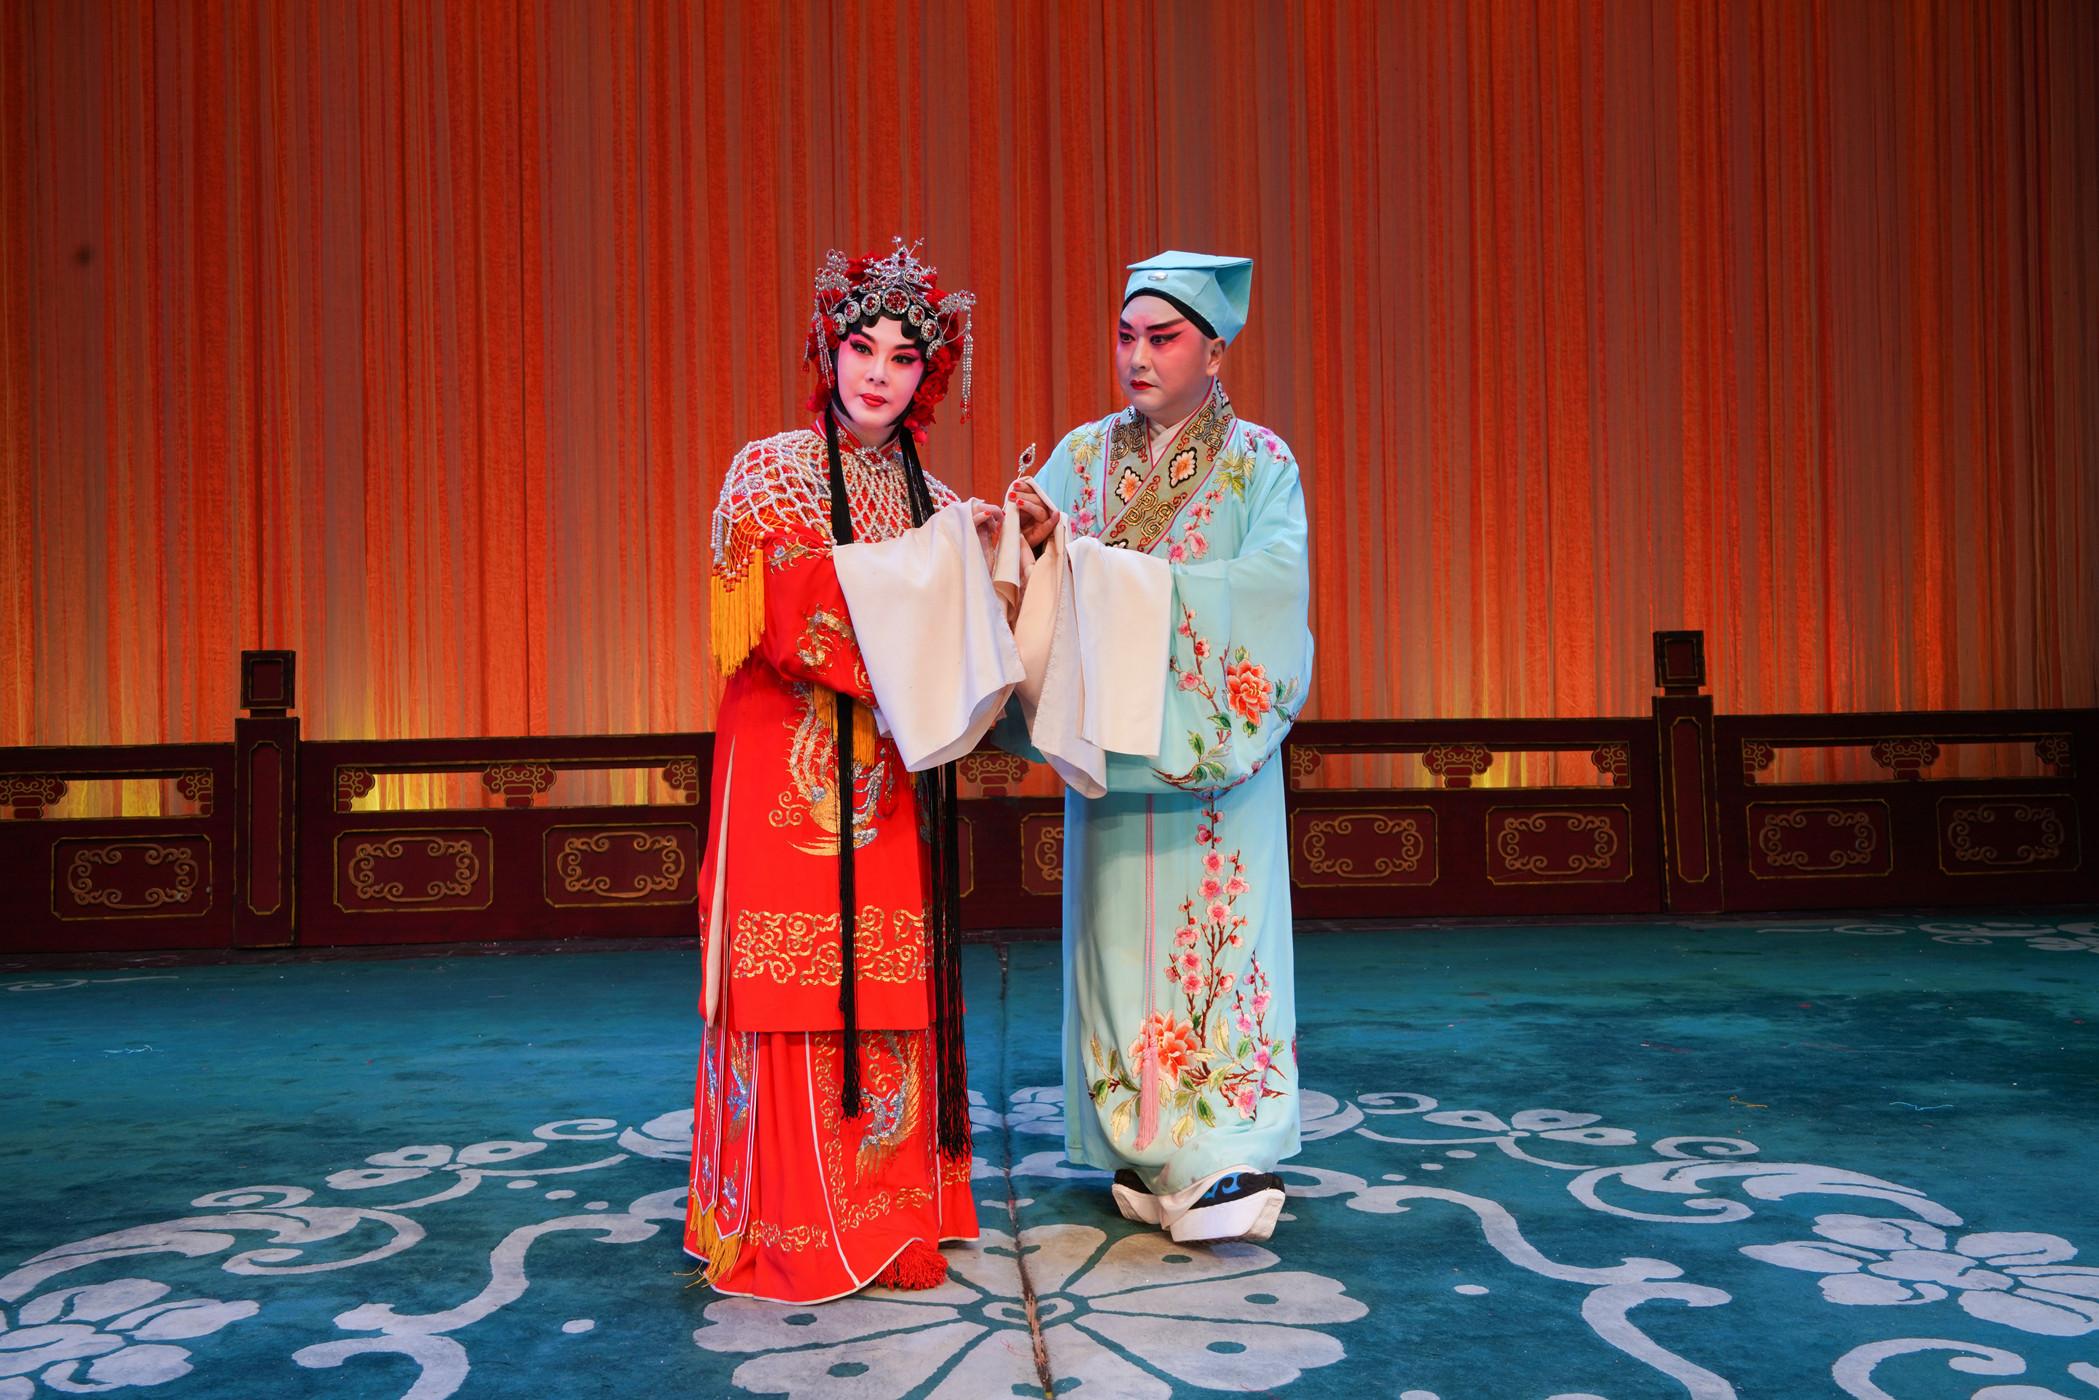 The Wuhan Han Opera Theatre, upon the invitation of the Leisure and Cultural Services Department, will make its debut at this year's Chinese Opera Festival in July. Photo shows a scene from "When the Plum Tree Blooms Again".